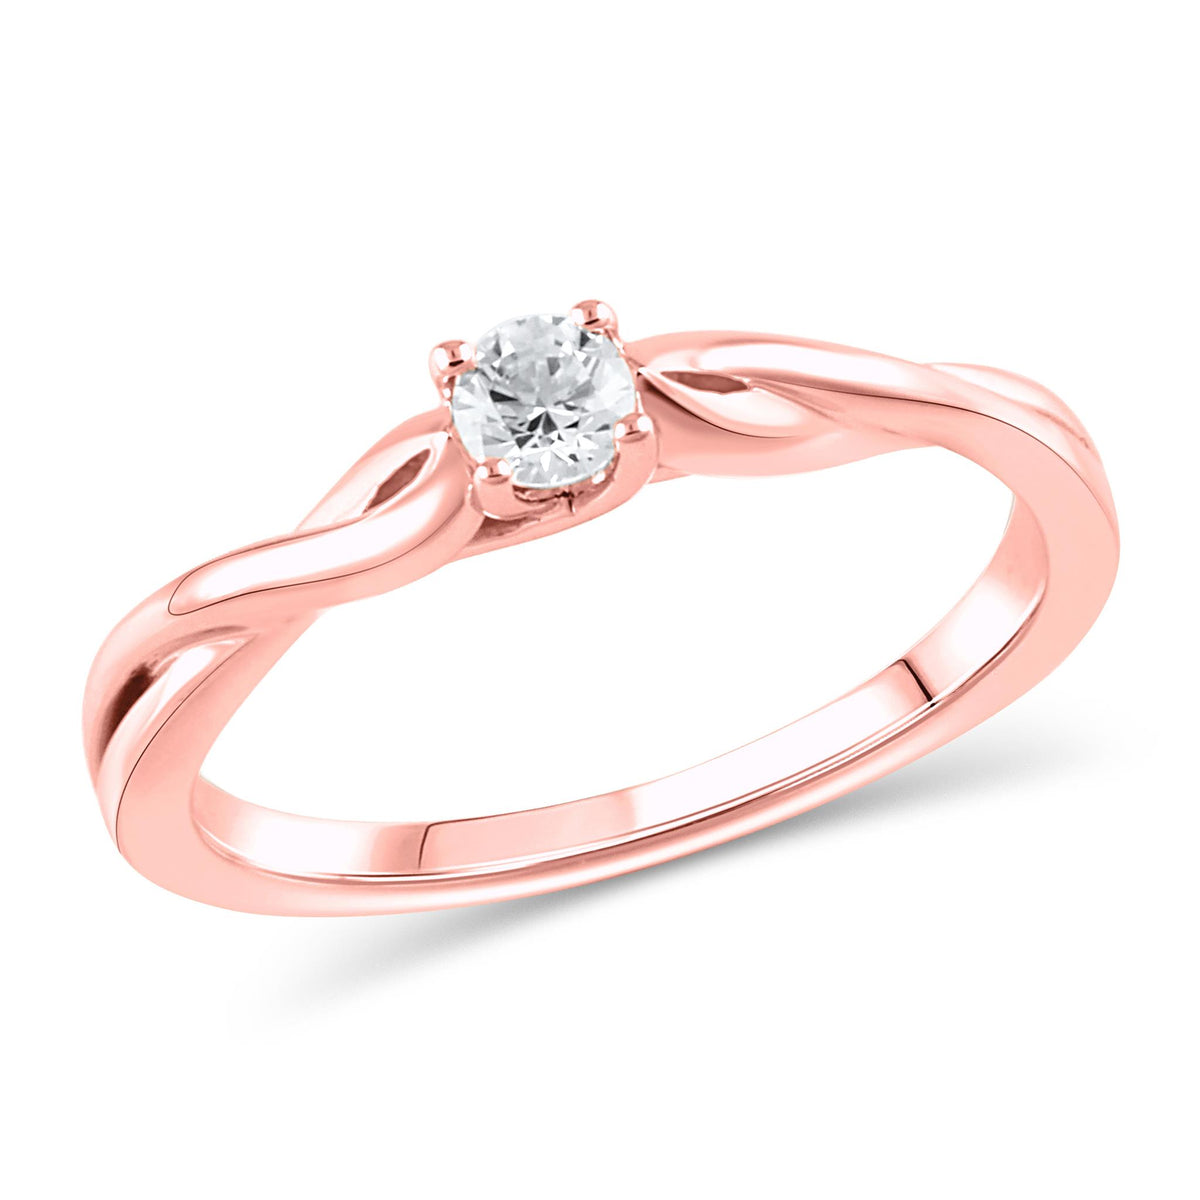 10Kt Rose Gold Classic Fashion Promise Ring With 0.14cttw Natural Diamonds